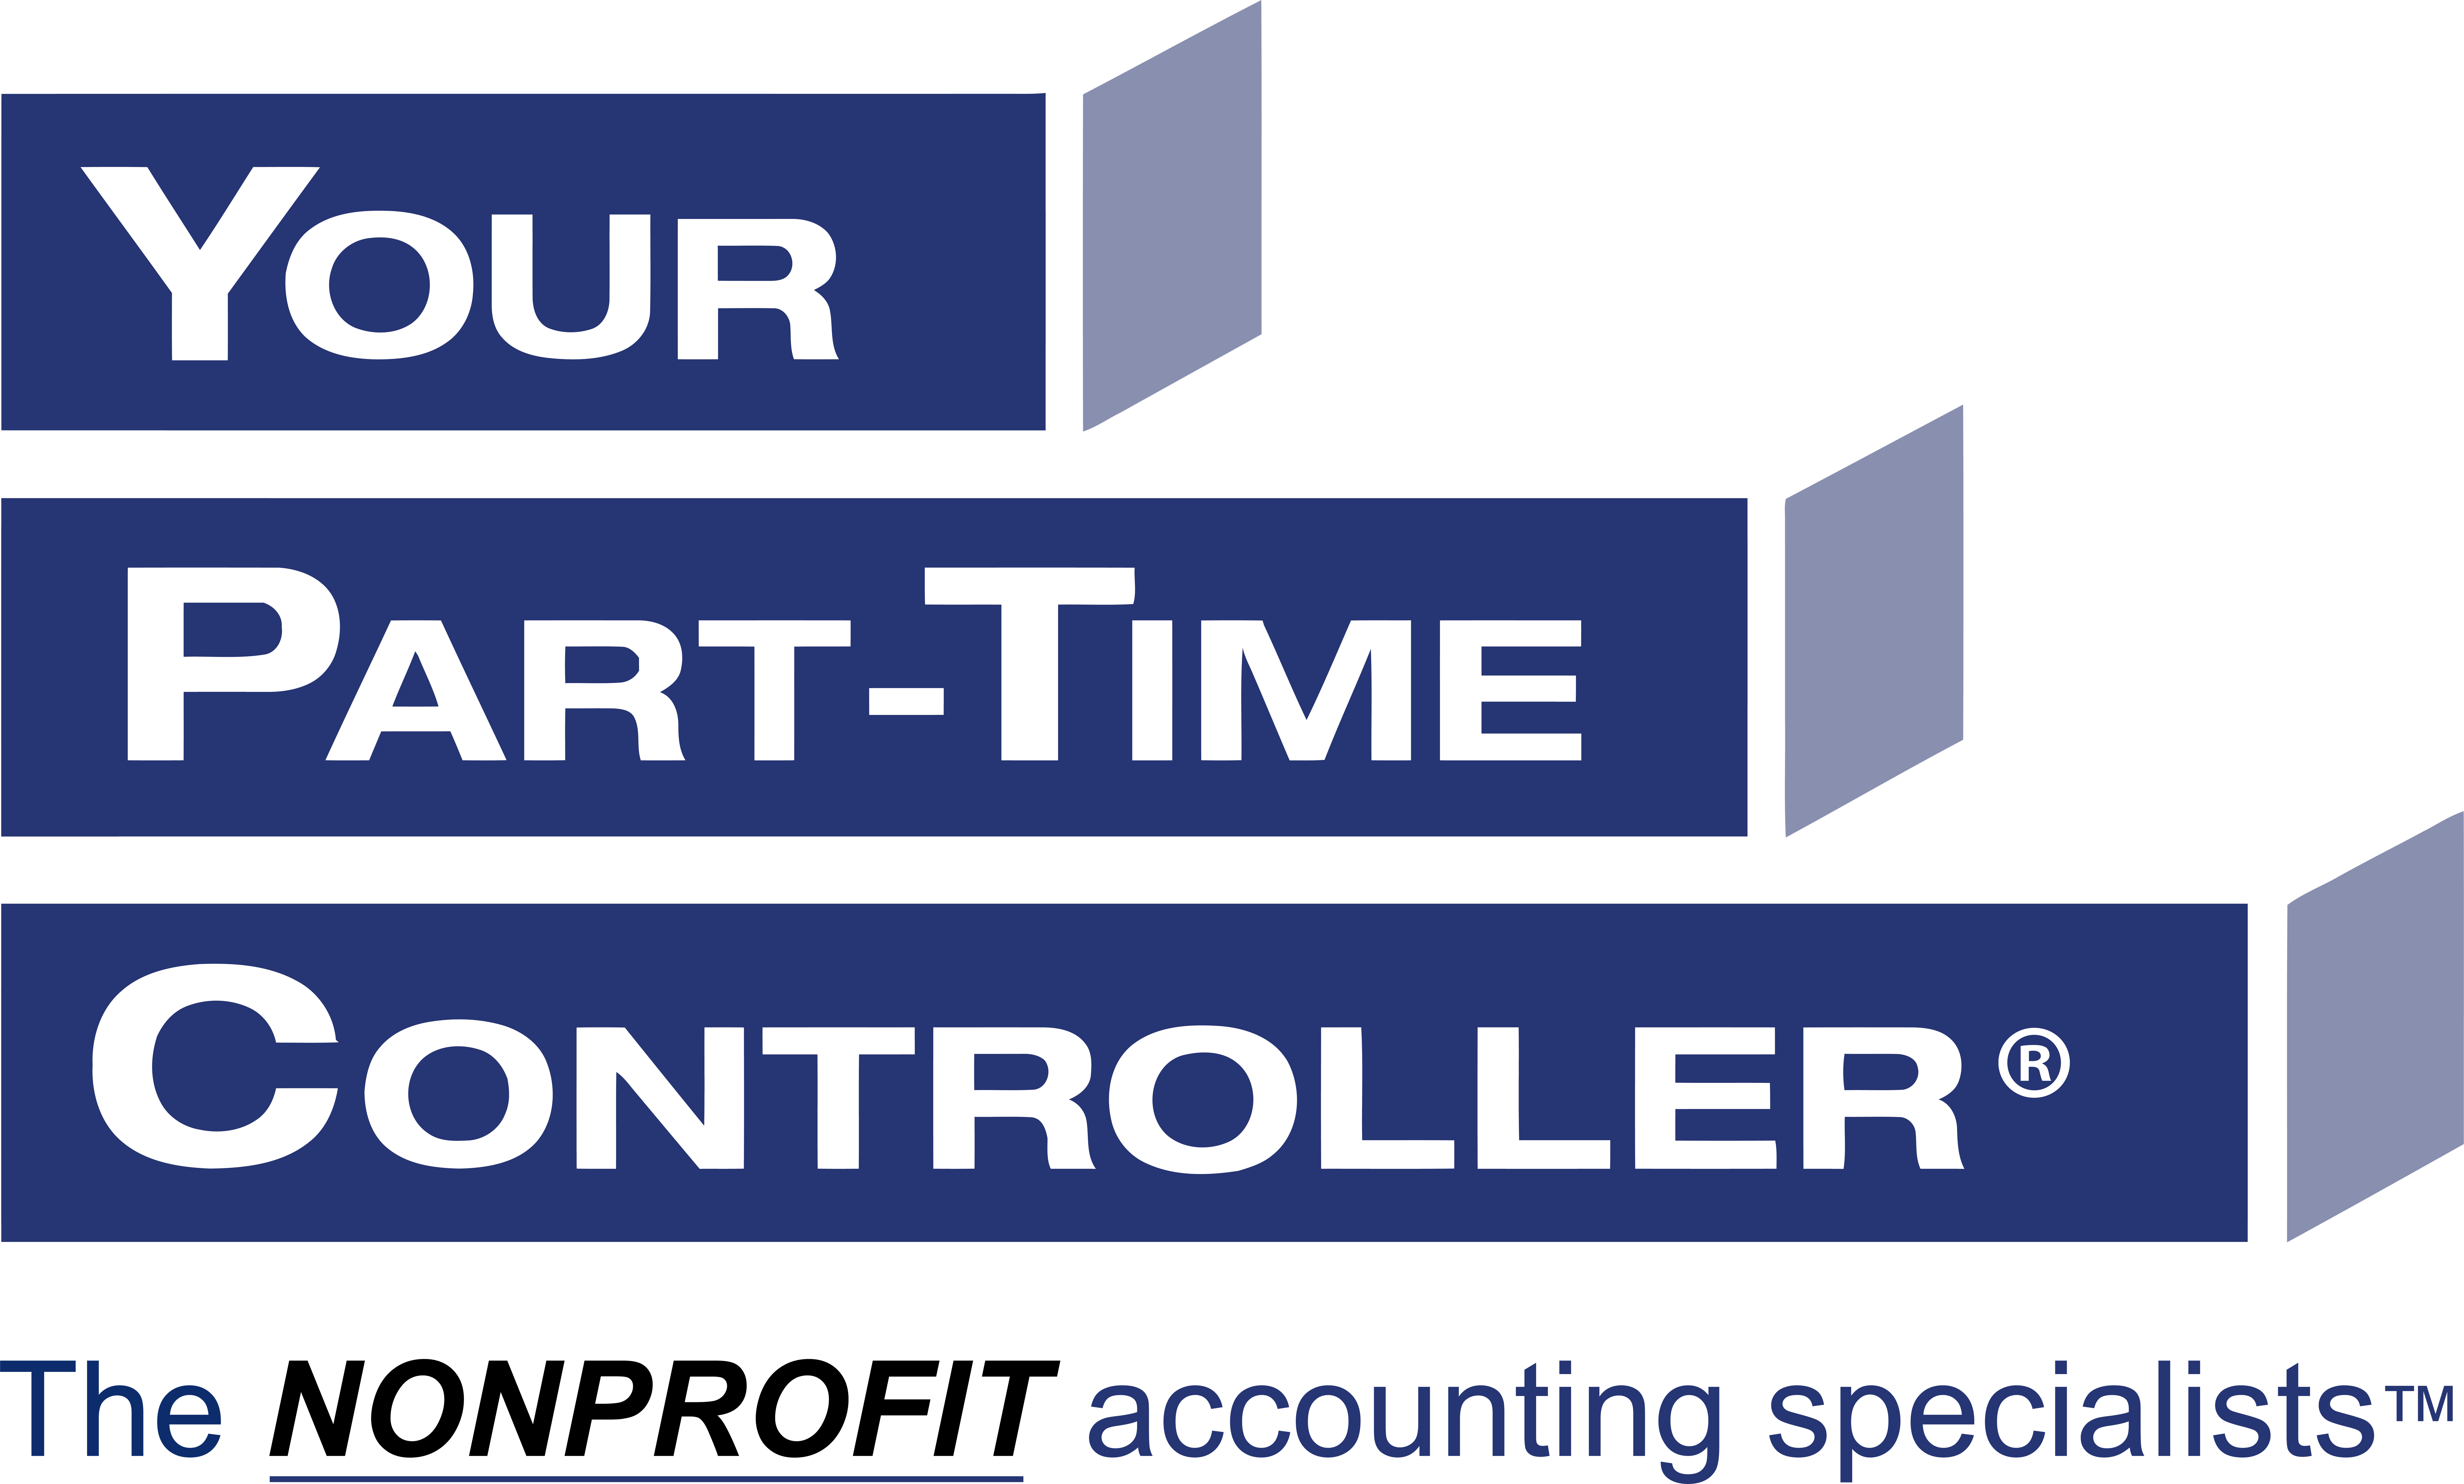 Your Part-Time Controller logo The Nonprofit accounting specialists